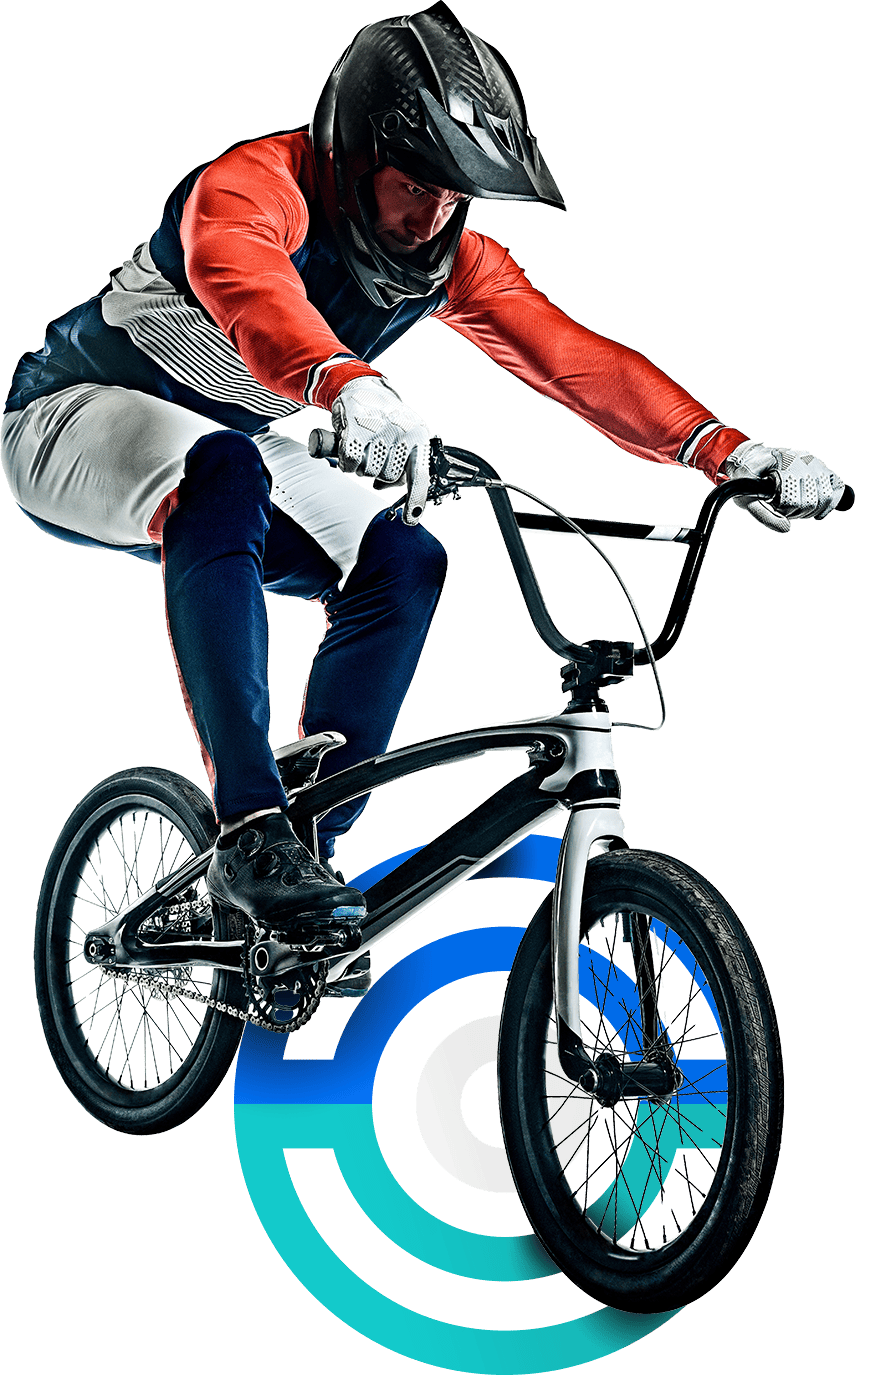 In the image, a male cyclist is riding a BMX. He is wearing a helmet and is dressed in a blue, red and white uniform, apart from gloves. He is close to make a stunt.